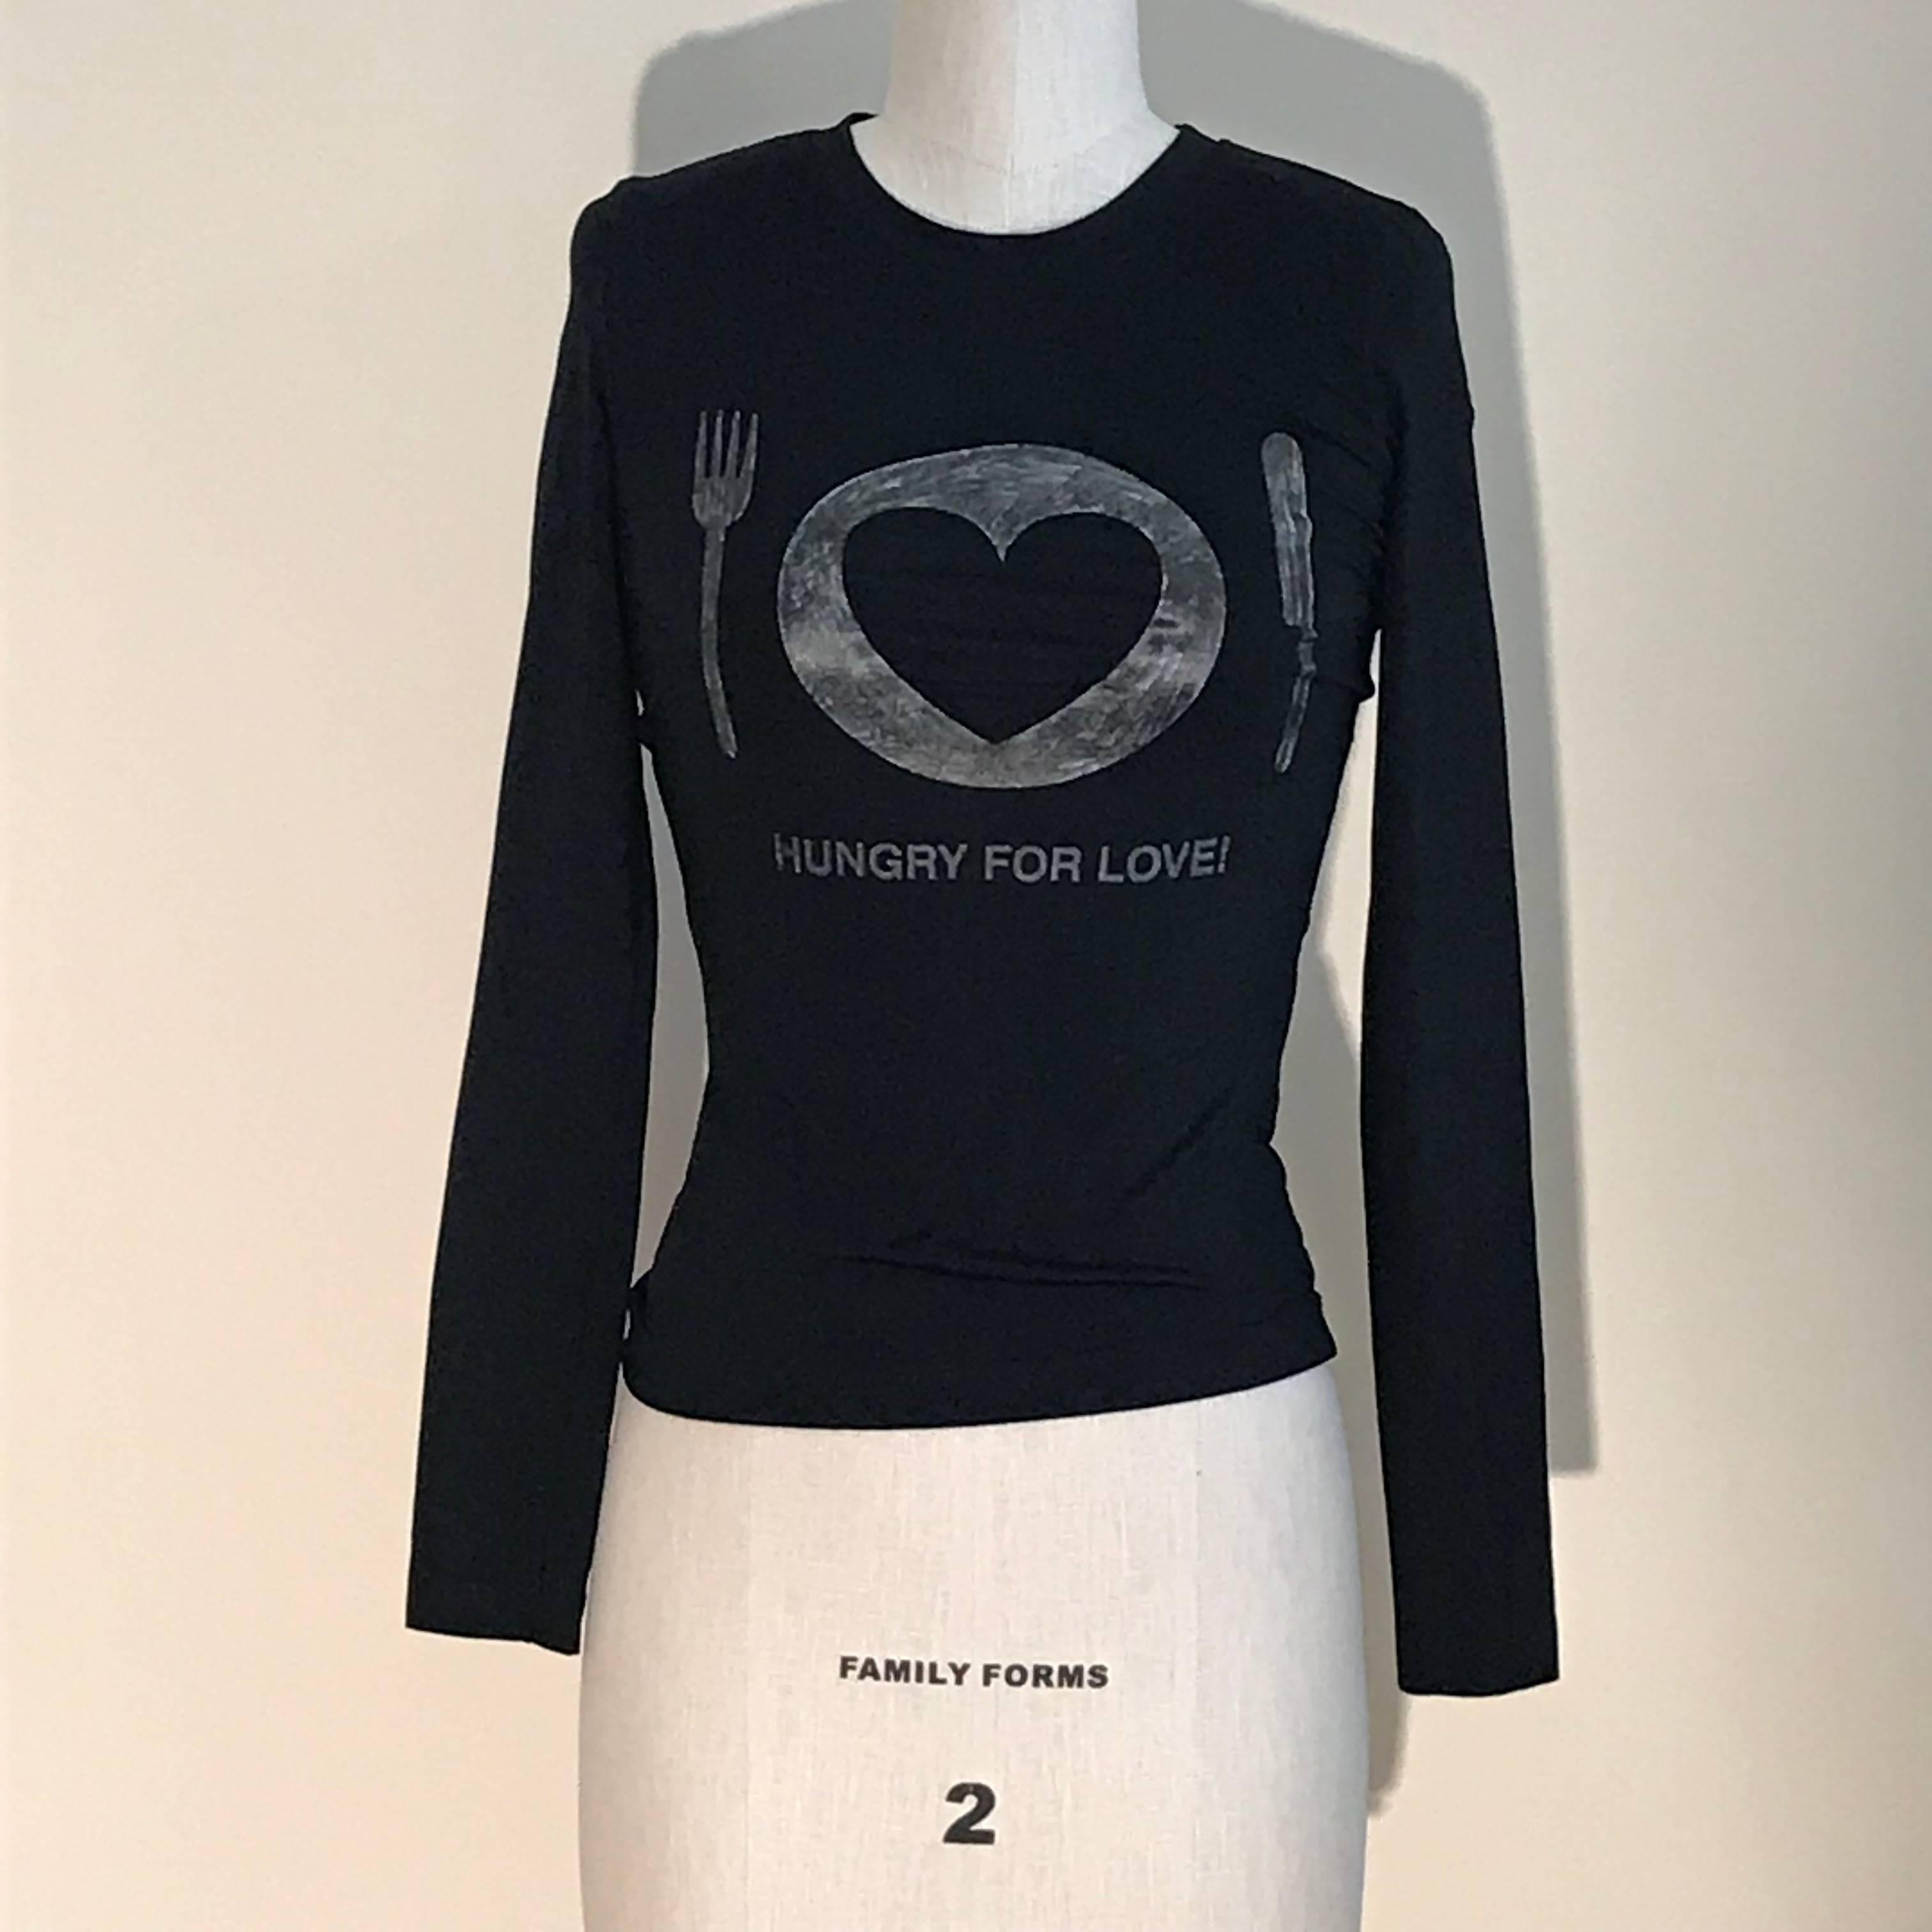 Vintage 1990s Moschino Jeans black Hungry For Love graphic long sleeve t-shirt. Features a table setting with a fork, knife, and a plate with a heart. Somewhat scribbly silvery grey shading at graphic.

78% polyamide, 22% elastane. 

Made in